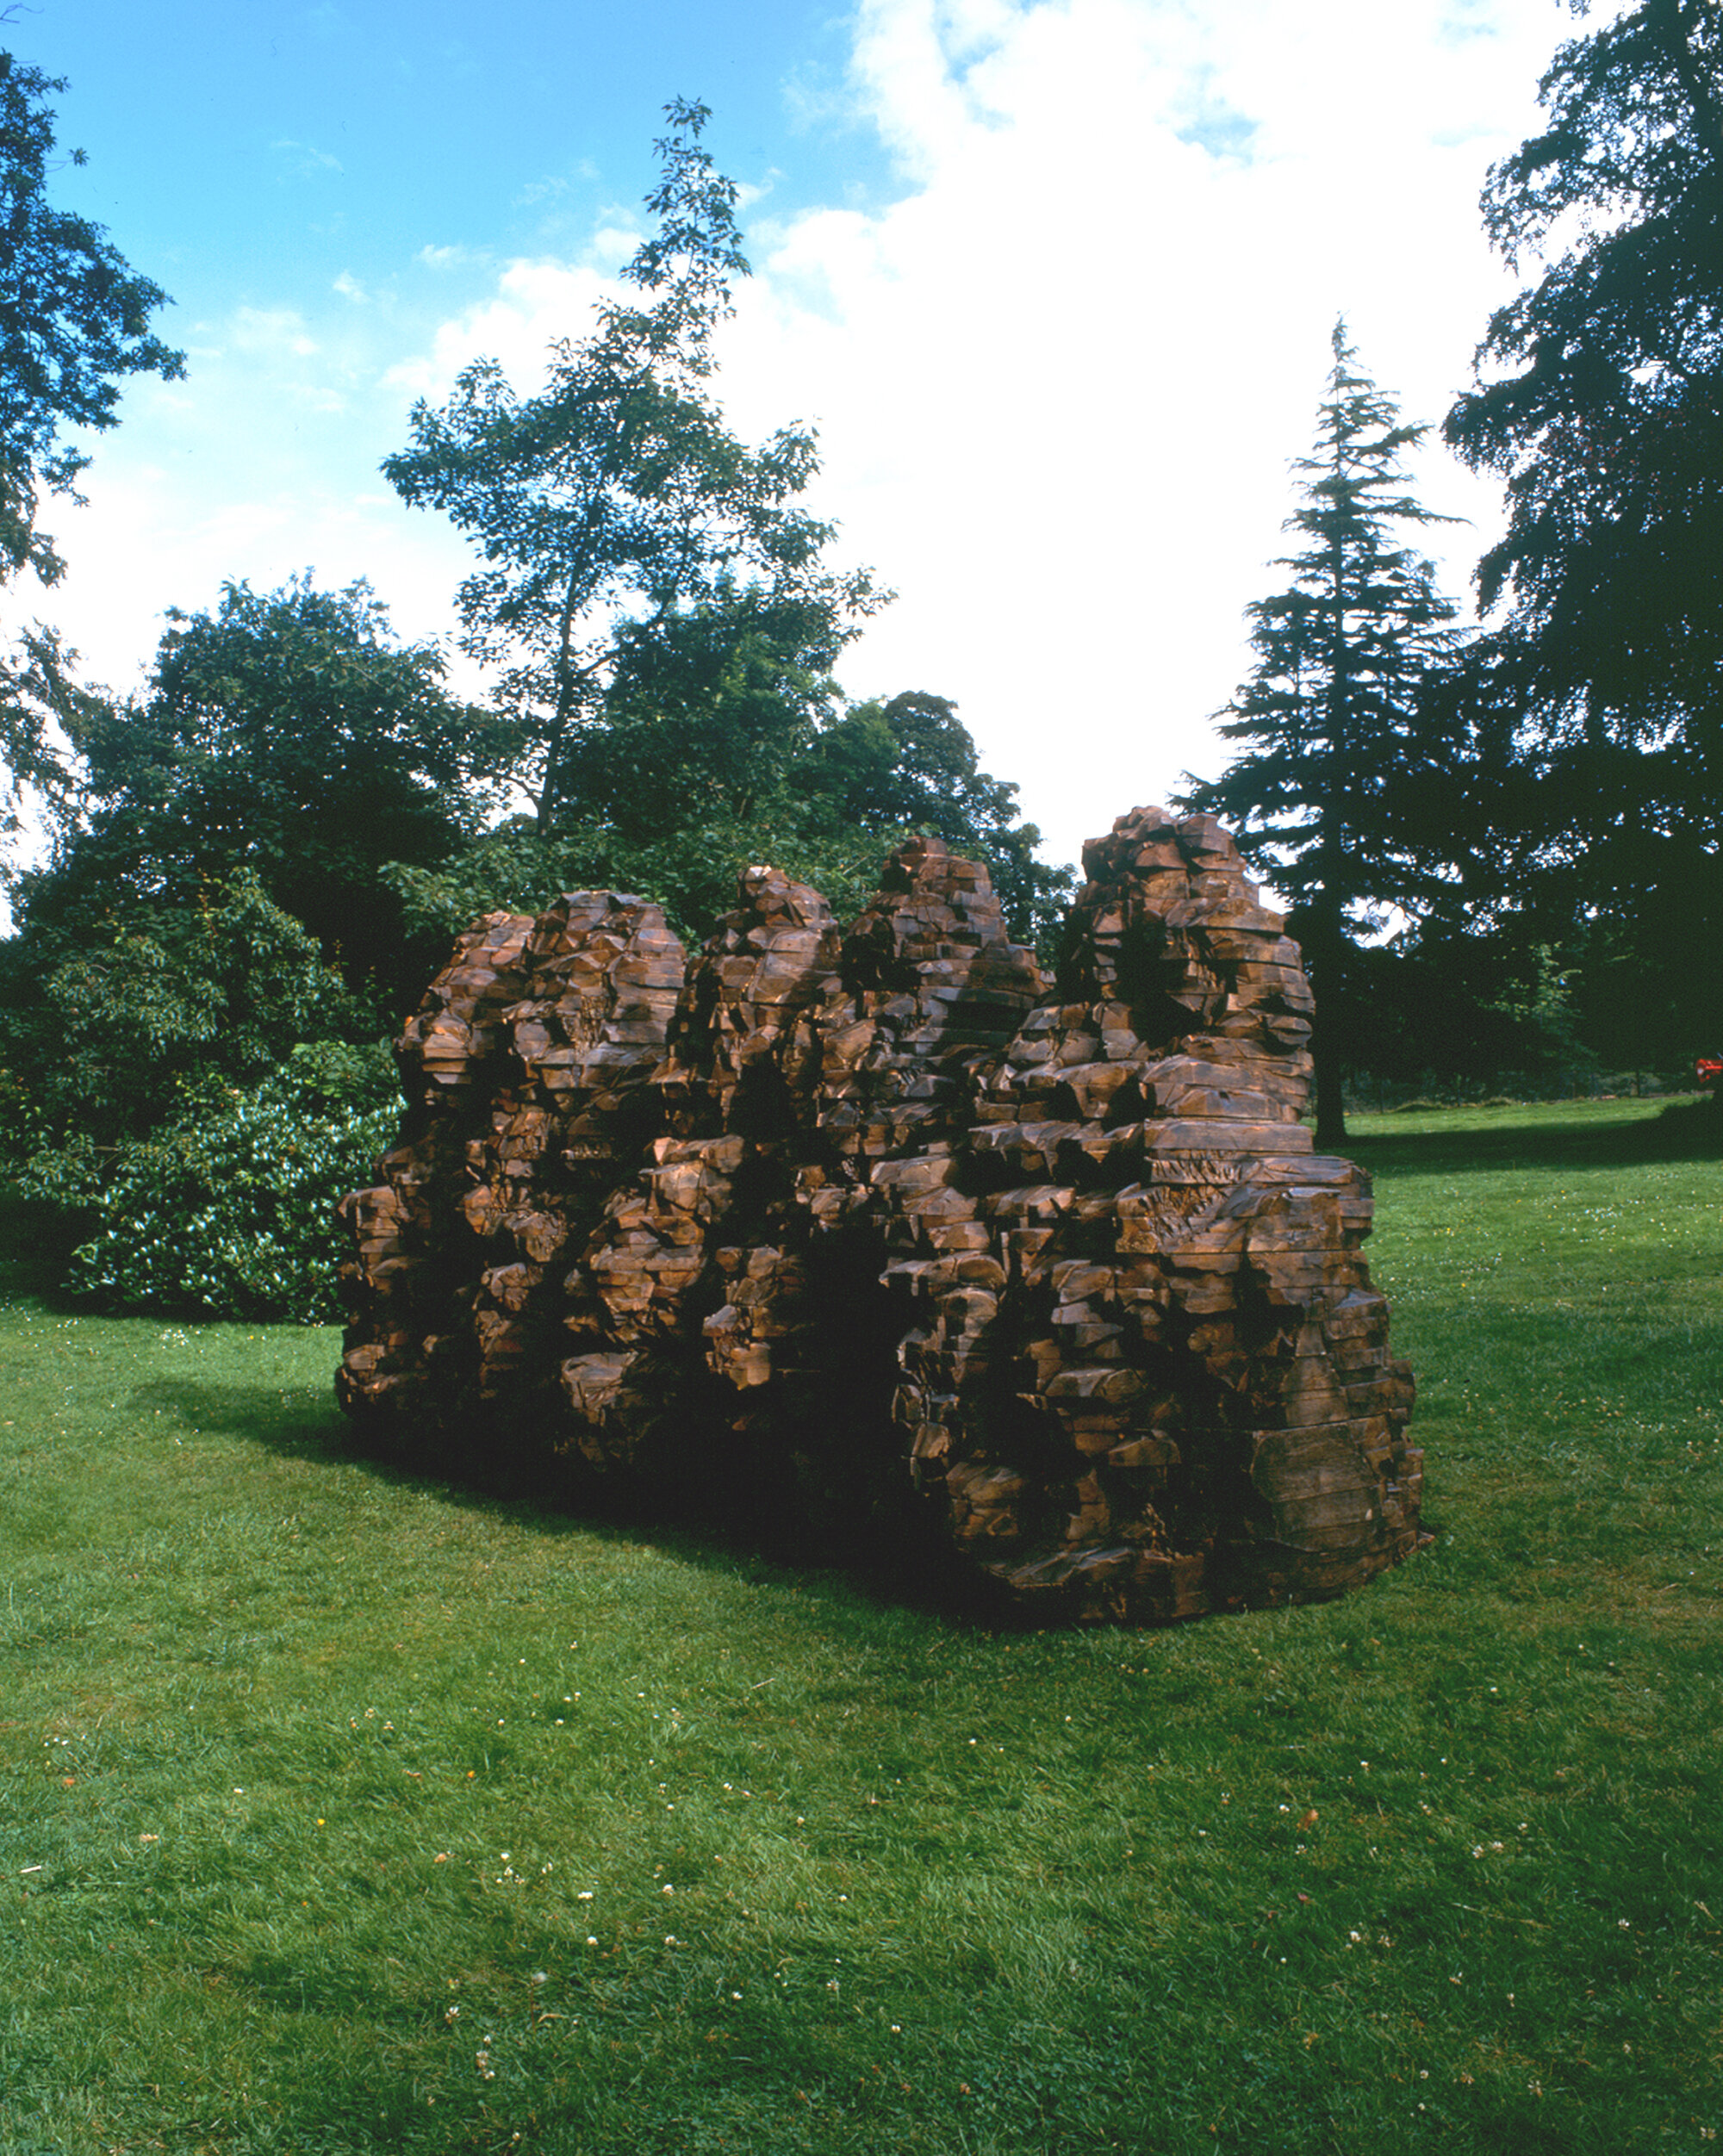       ence pence , 1997 Cedar and graphite 89.5 x 186.125 x 72 in.    Yorkshire Sculpture Park  